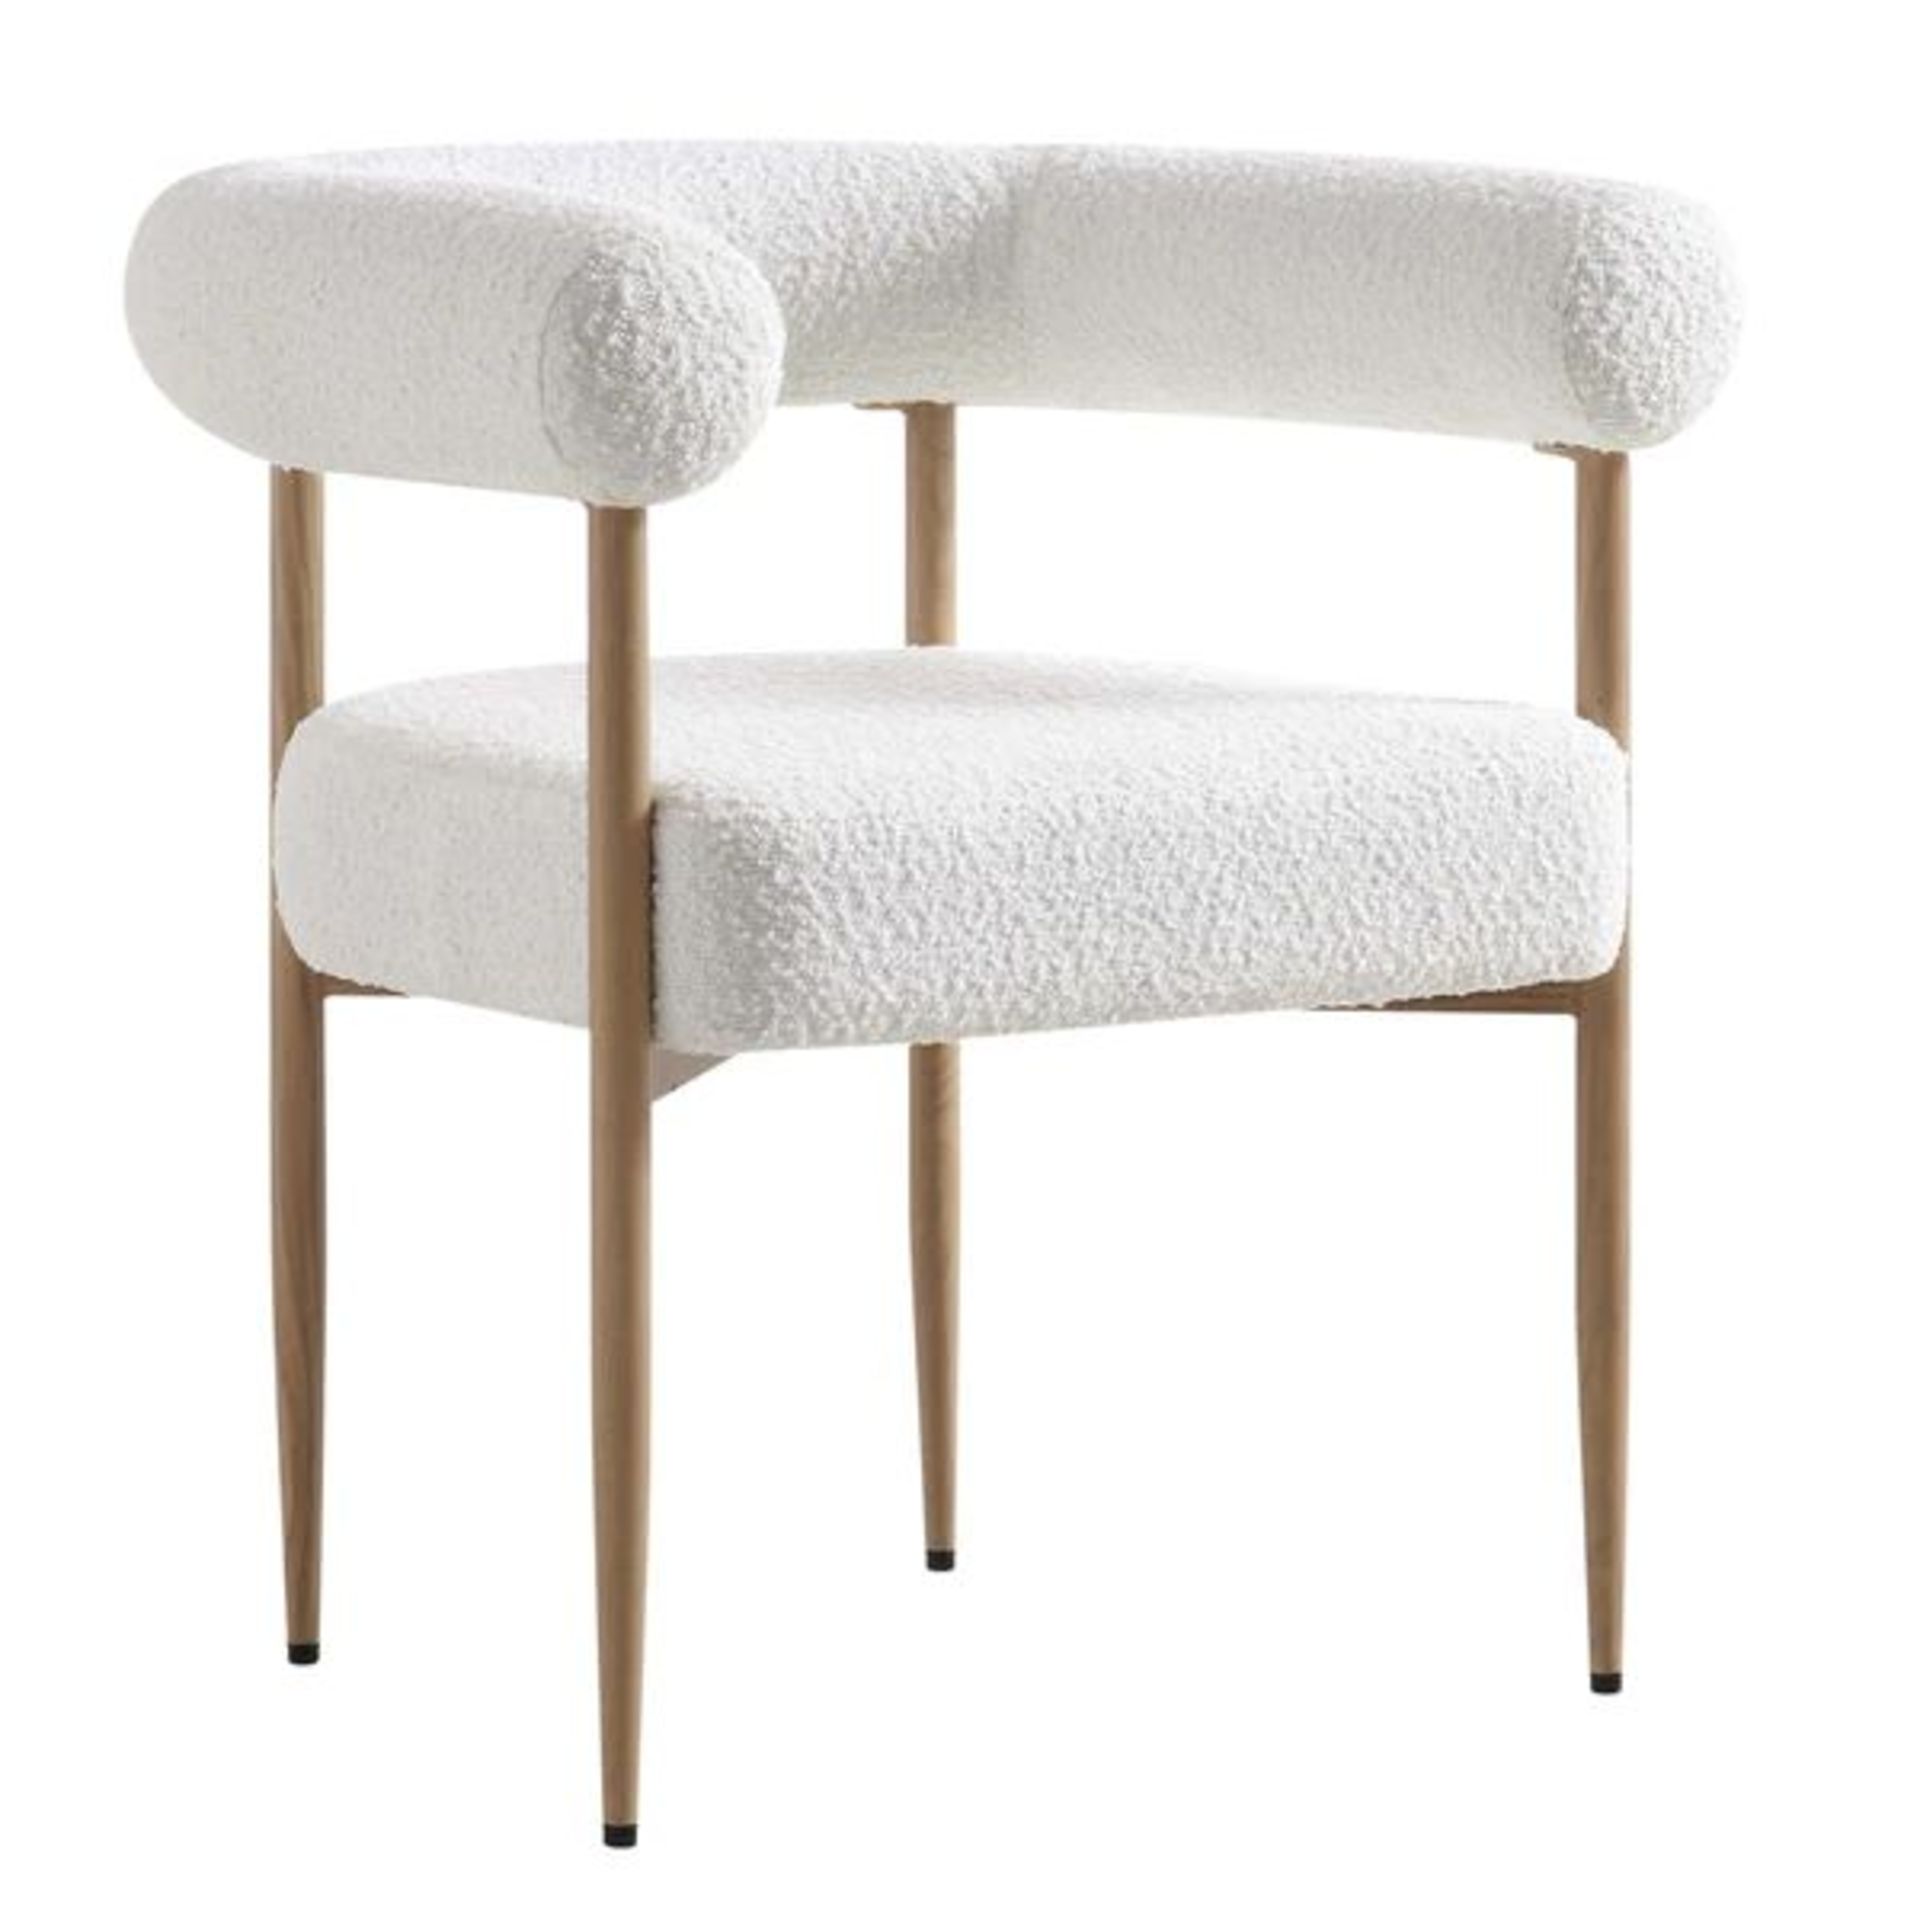 Fulbourn White Boucle Dining Chair with Natural Wood Effect Legs. - R14. RRP £209.99. Well-cushioned - Image 2 of 2